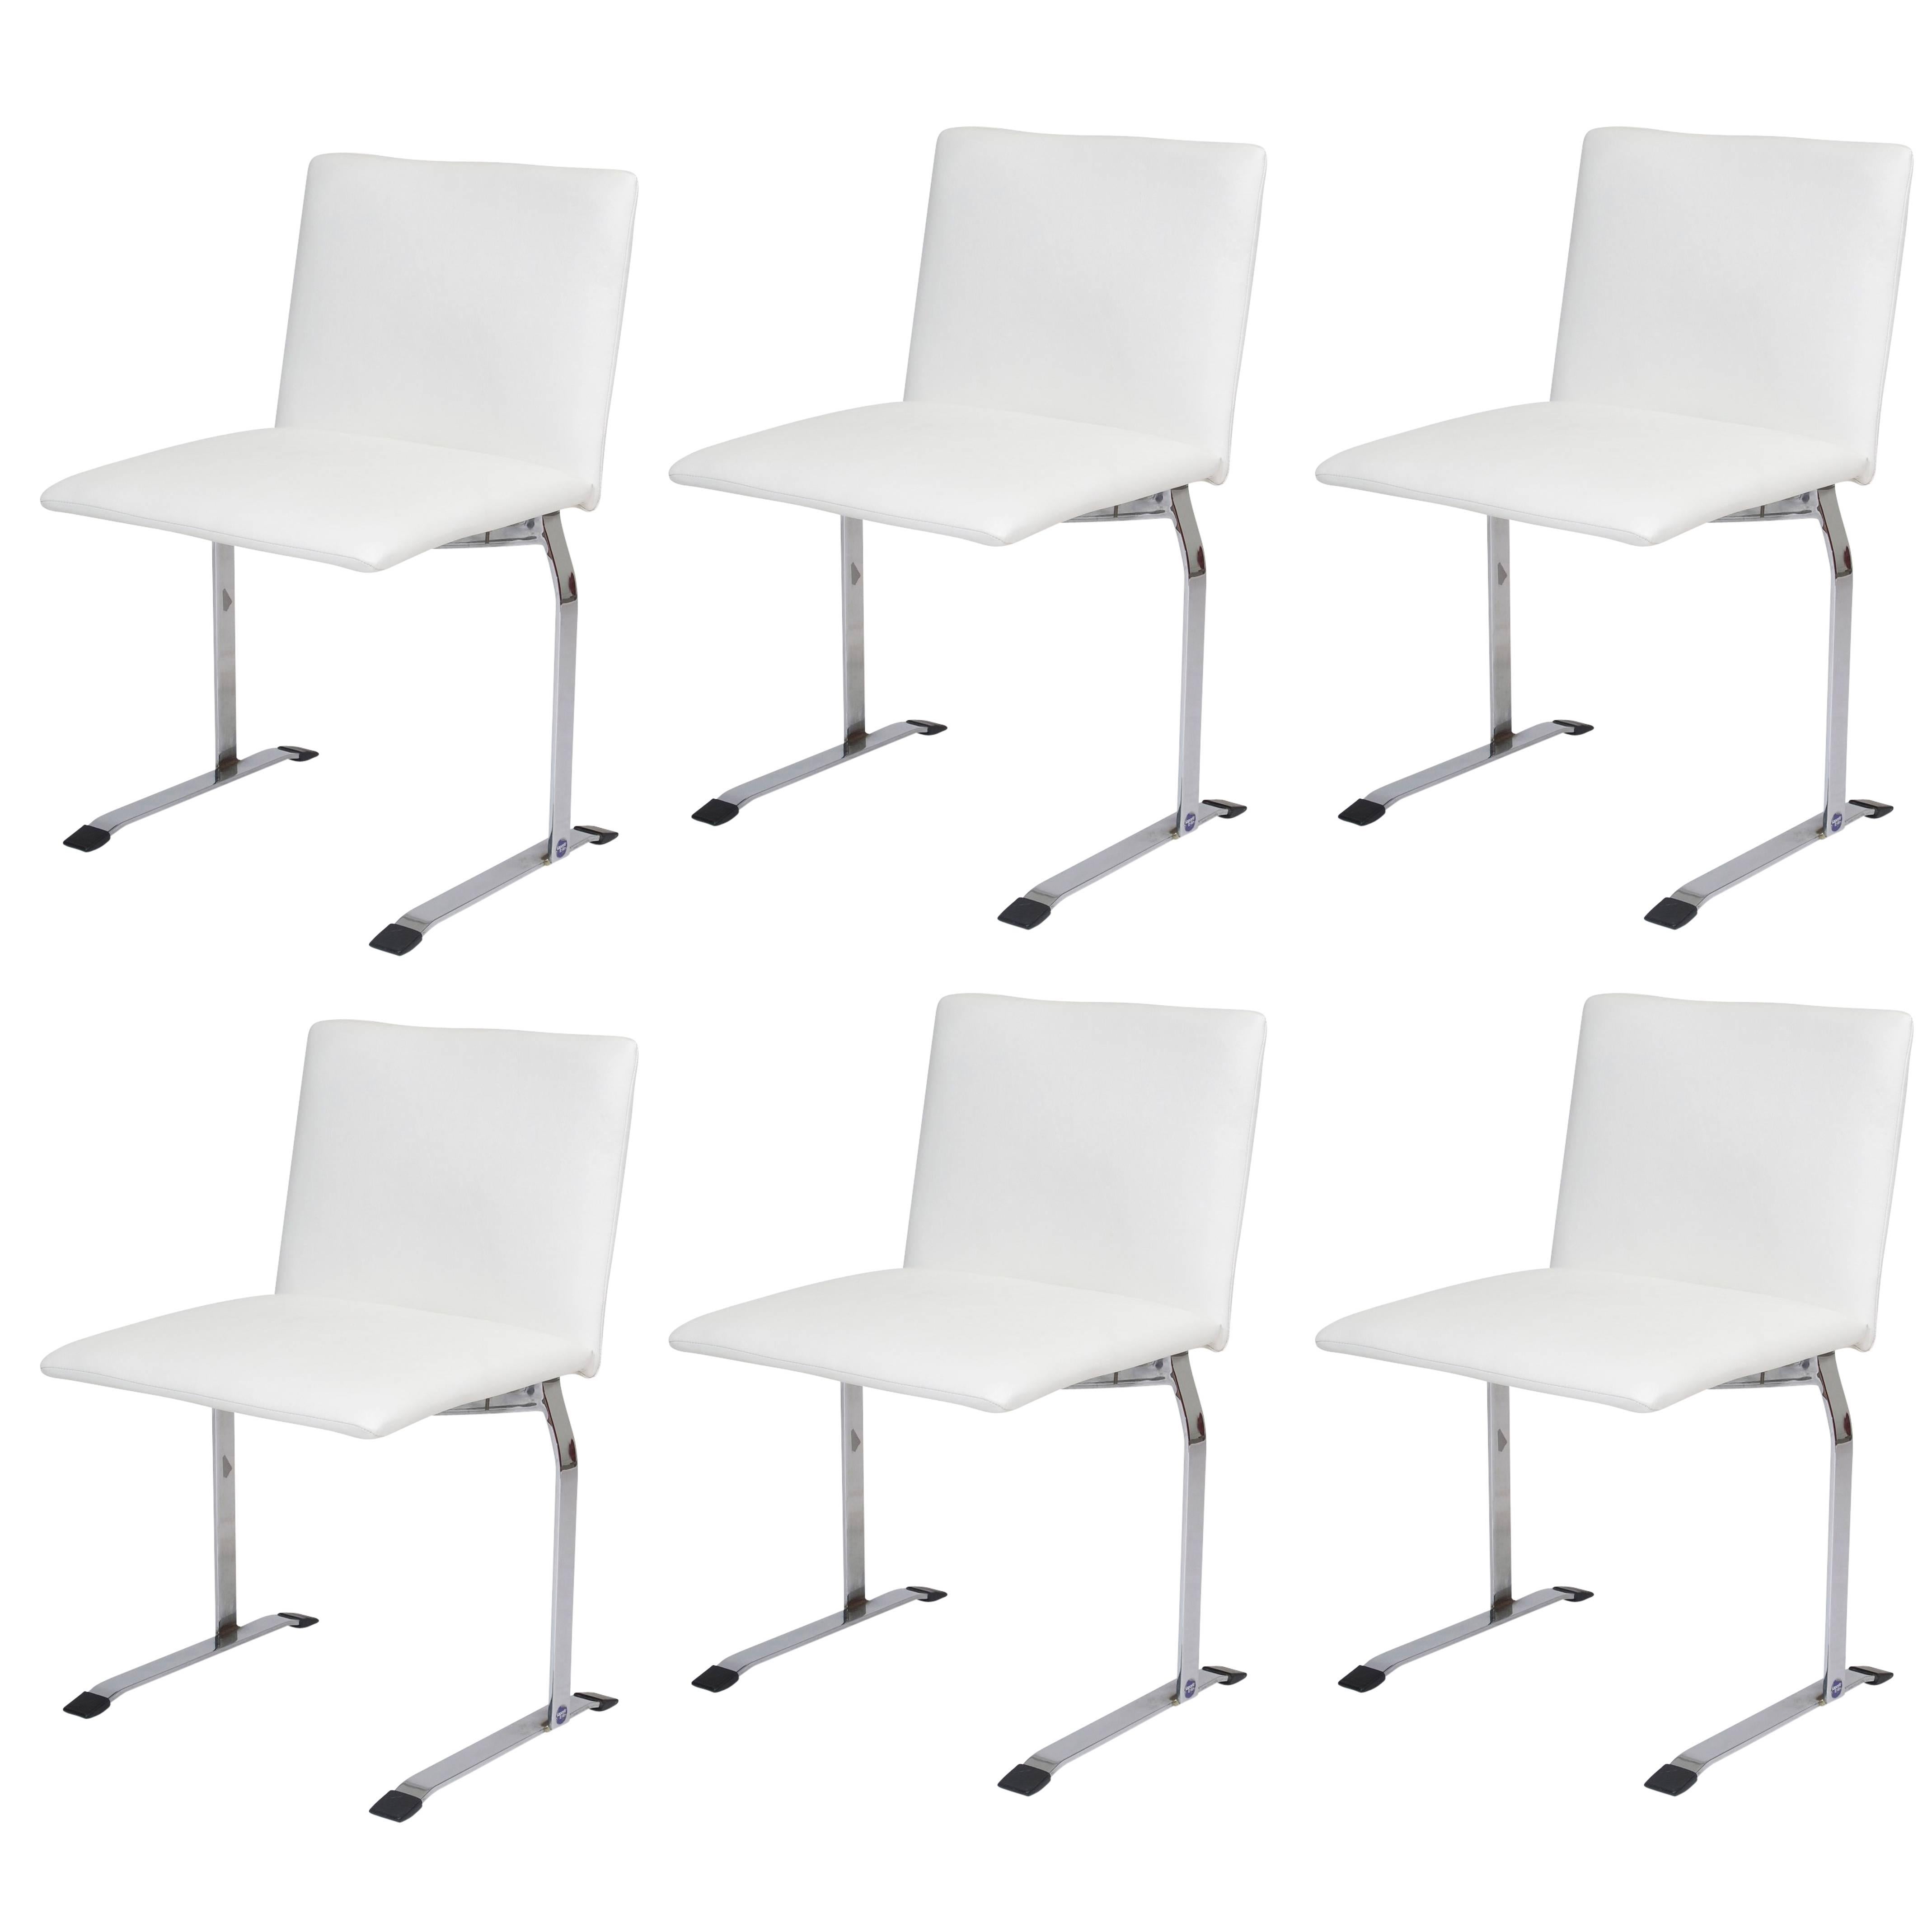 Giovanni Offredi for Saporiti Dining Chairs in White Vinyl on Chrome Steel Frame